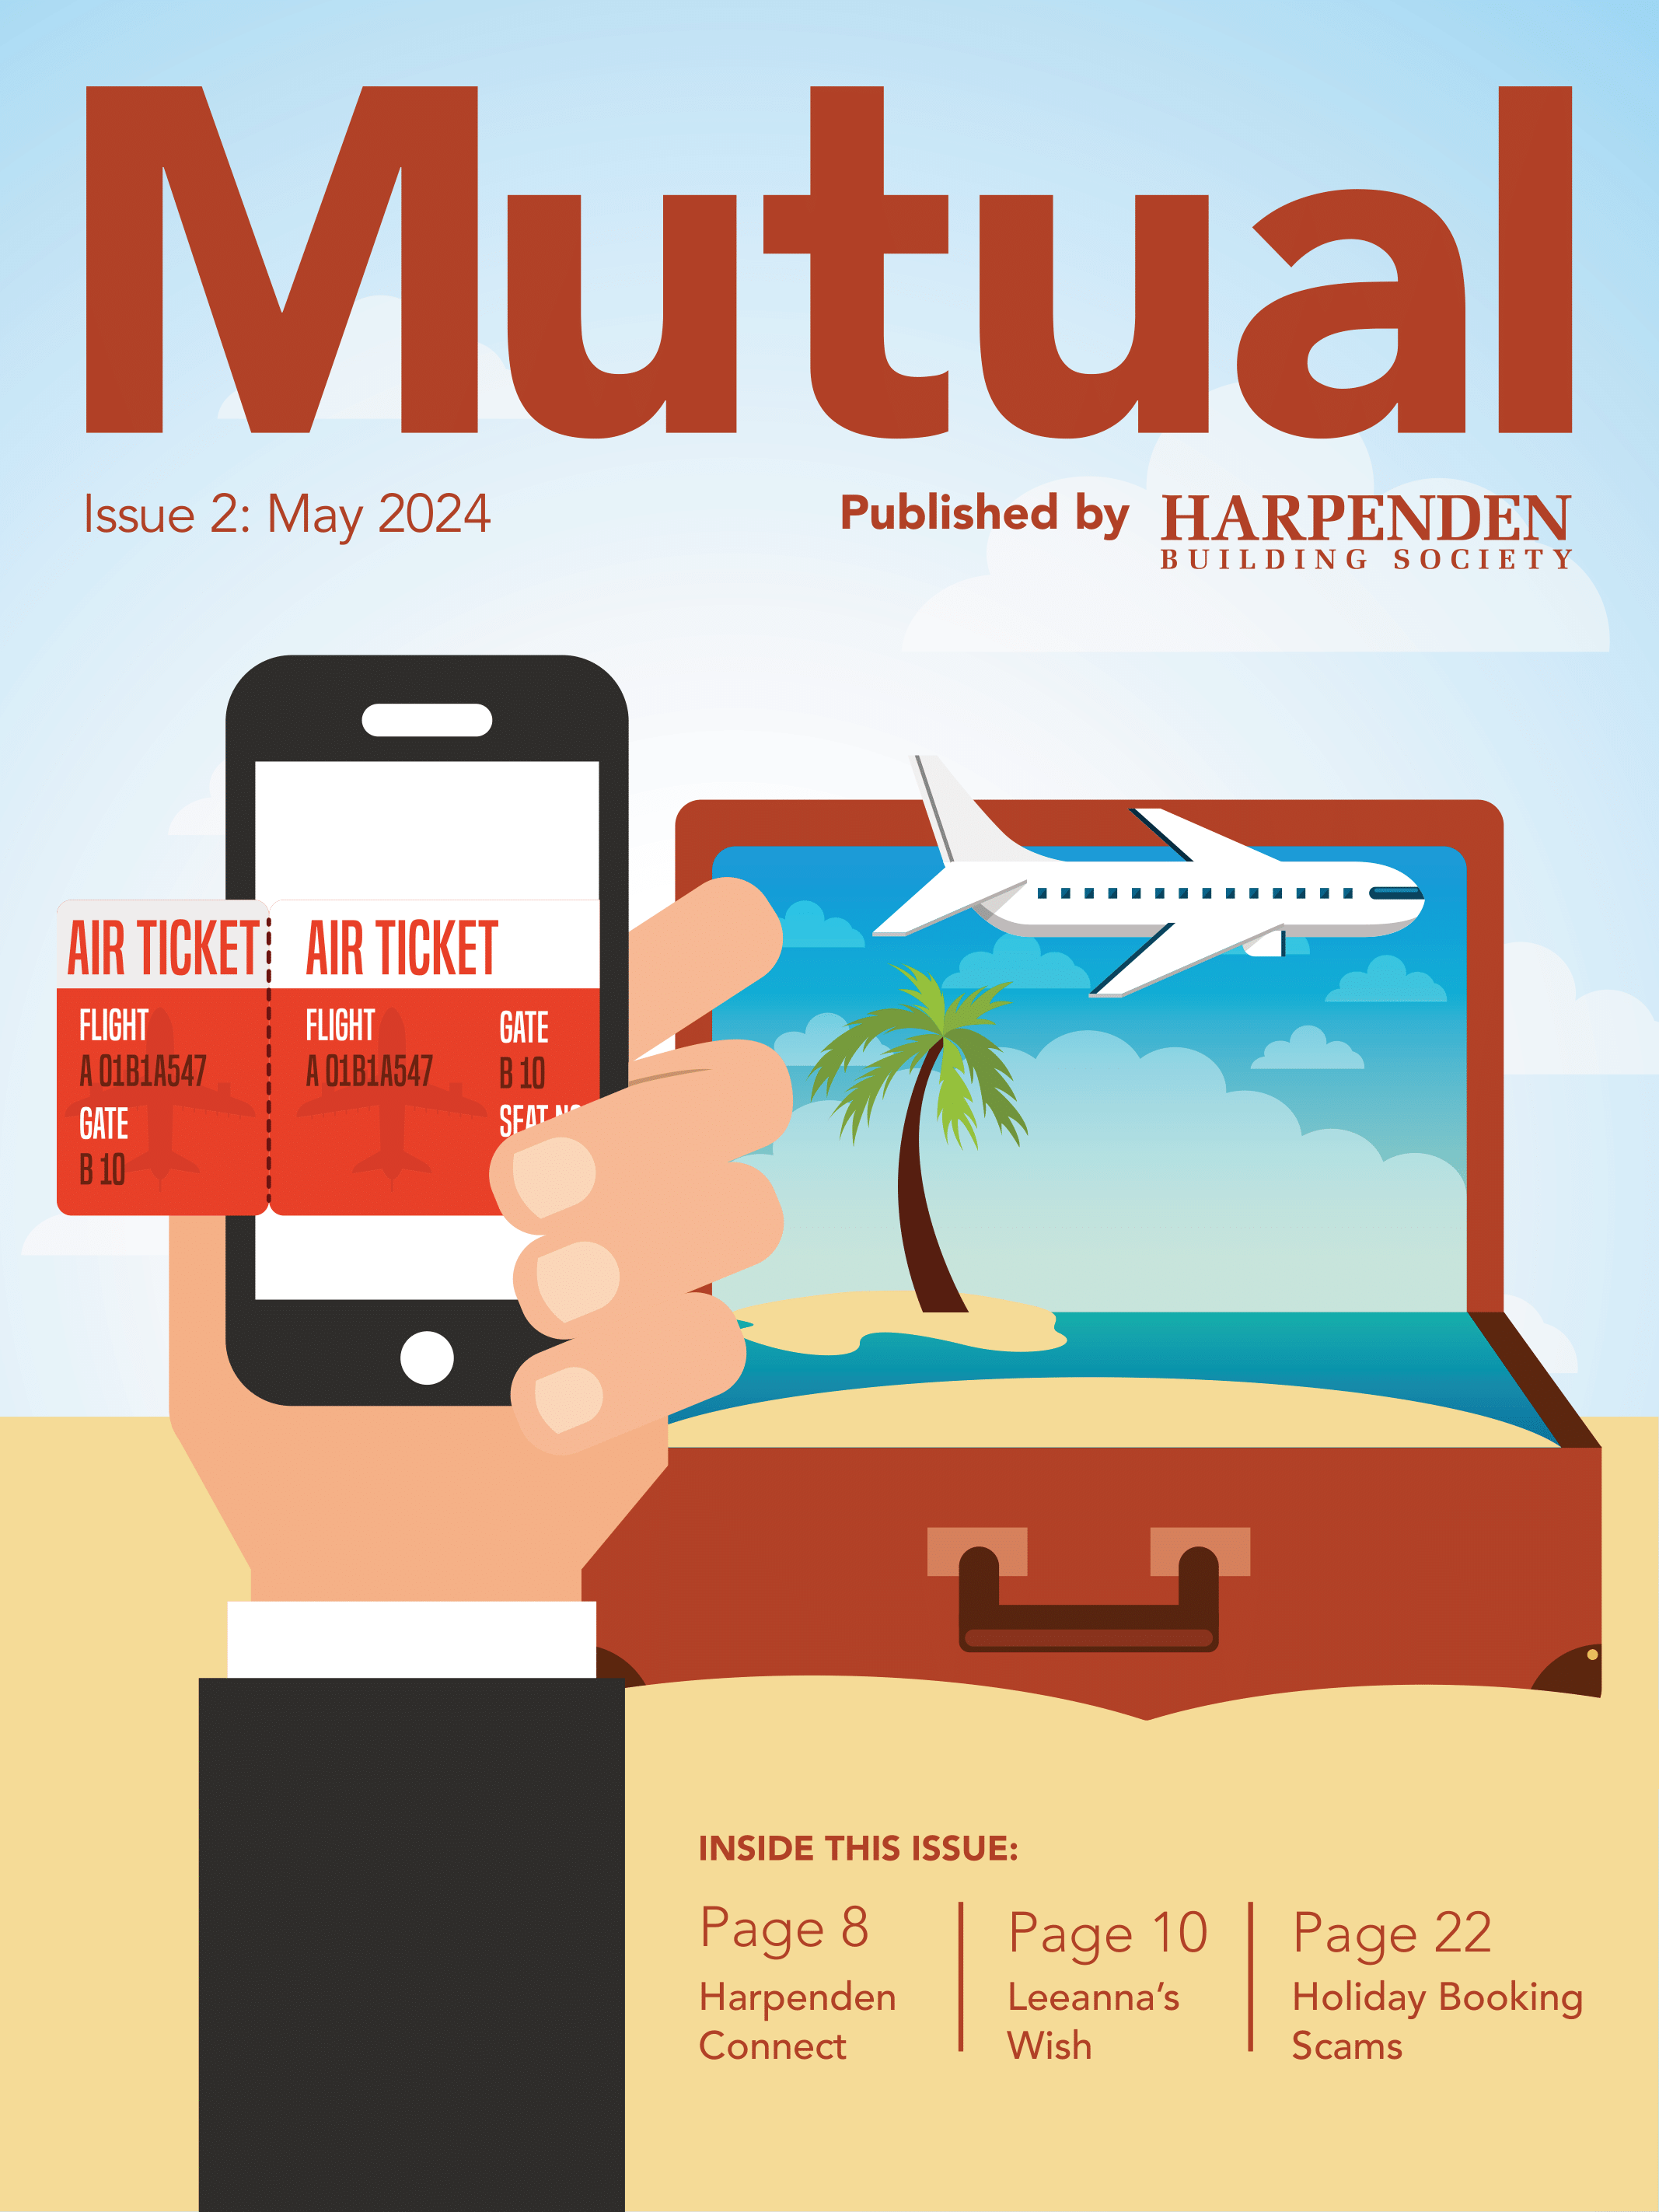 28313_Mutual Magazine Ed 02 Apr 2024_v2_Full - sign off 230424-pages (1)-1